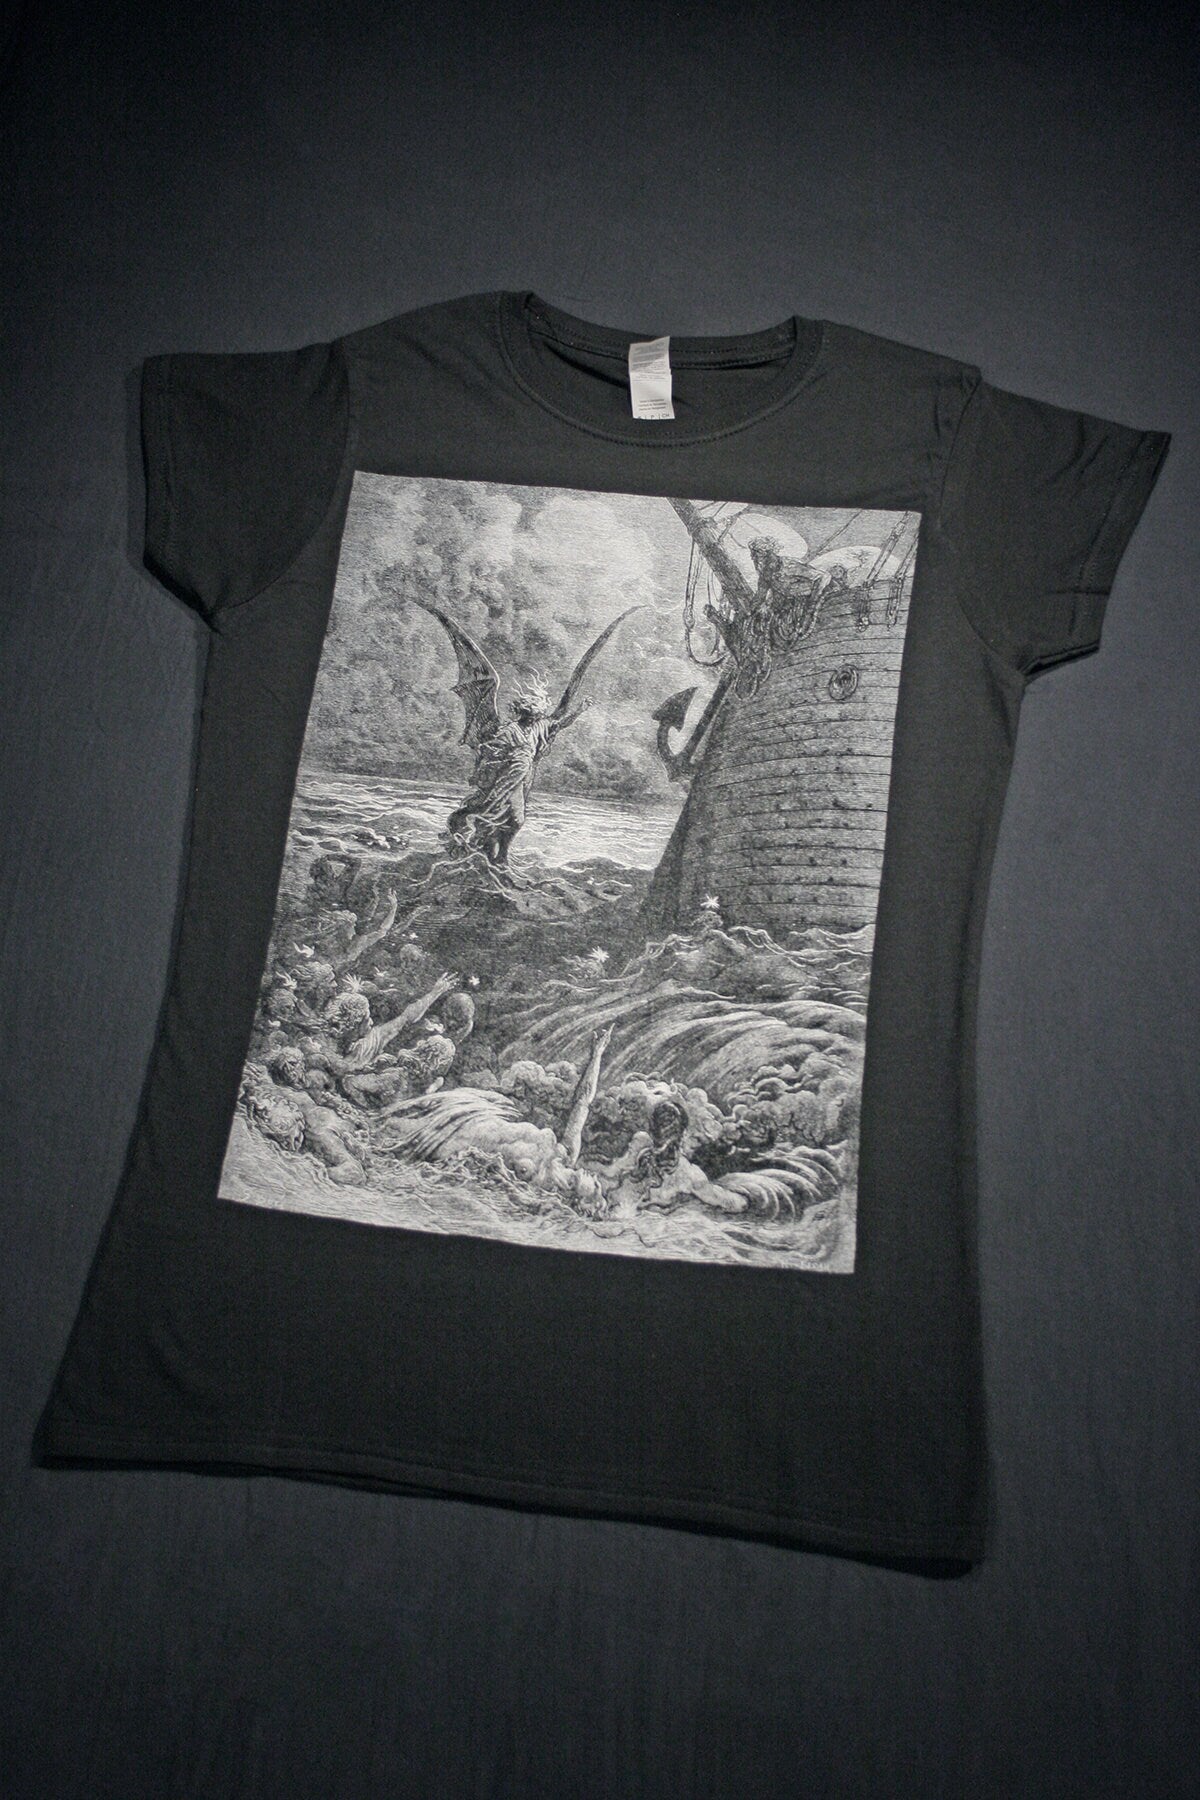 The Death-Fires Danced at Night, Rime of the ancient marine, illustration by Gustave Doré - T-shirt female fitted